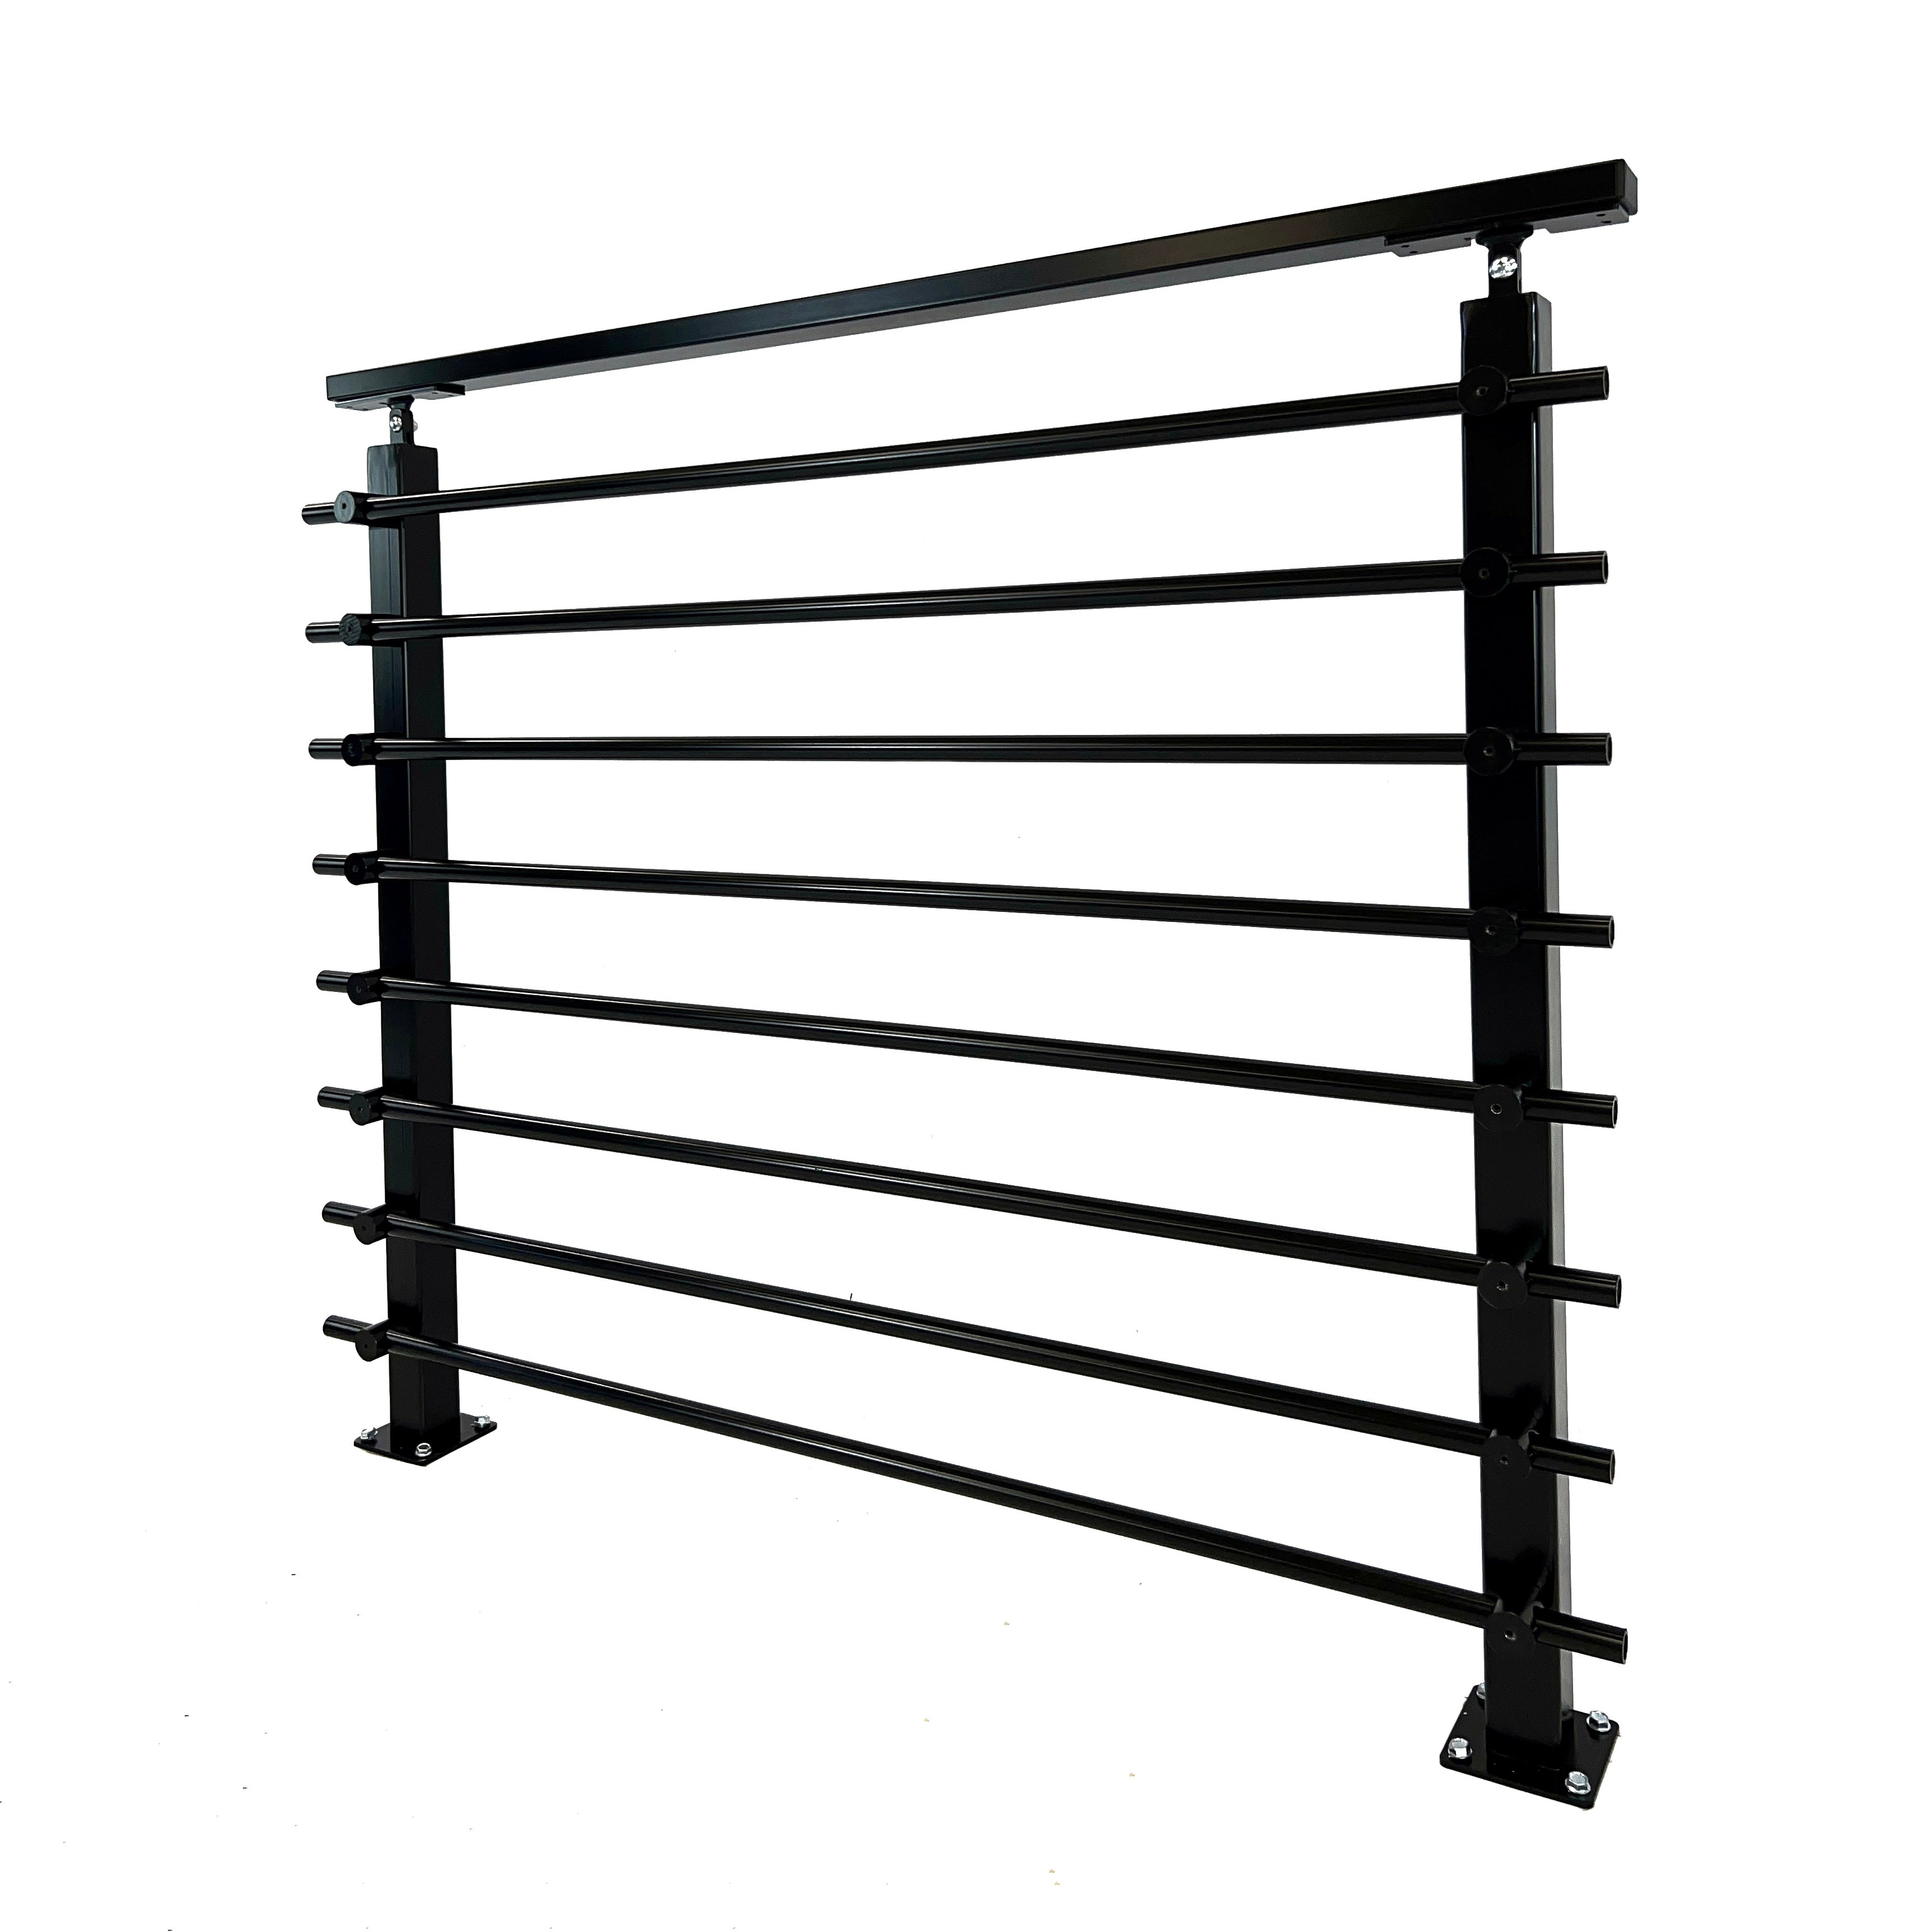 Modern Horizontal Fully Adjustable Railing Banister System, for Staircases, Balconies, and Decks, Complete Guard Railing Kit